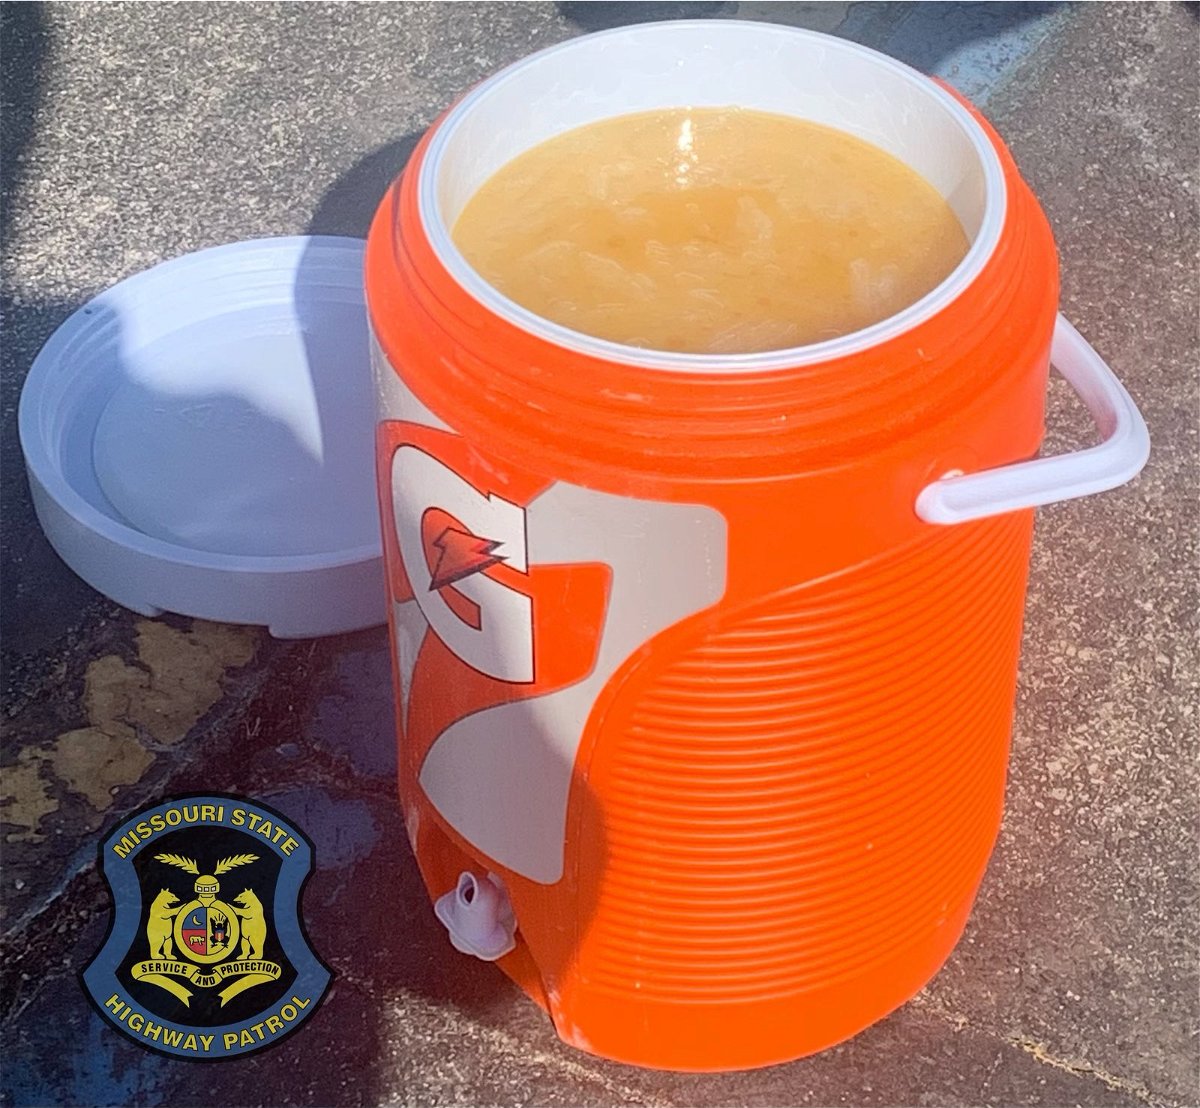 The Missouri State Highway Patrol says troopers recovered 30 pounds of meth during a traffic stop in Montgomery County on Monday, Feb. 21, 2022. Troopers said the drugs were found hidden inside of a portable cooler. 